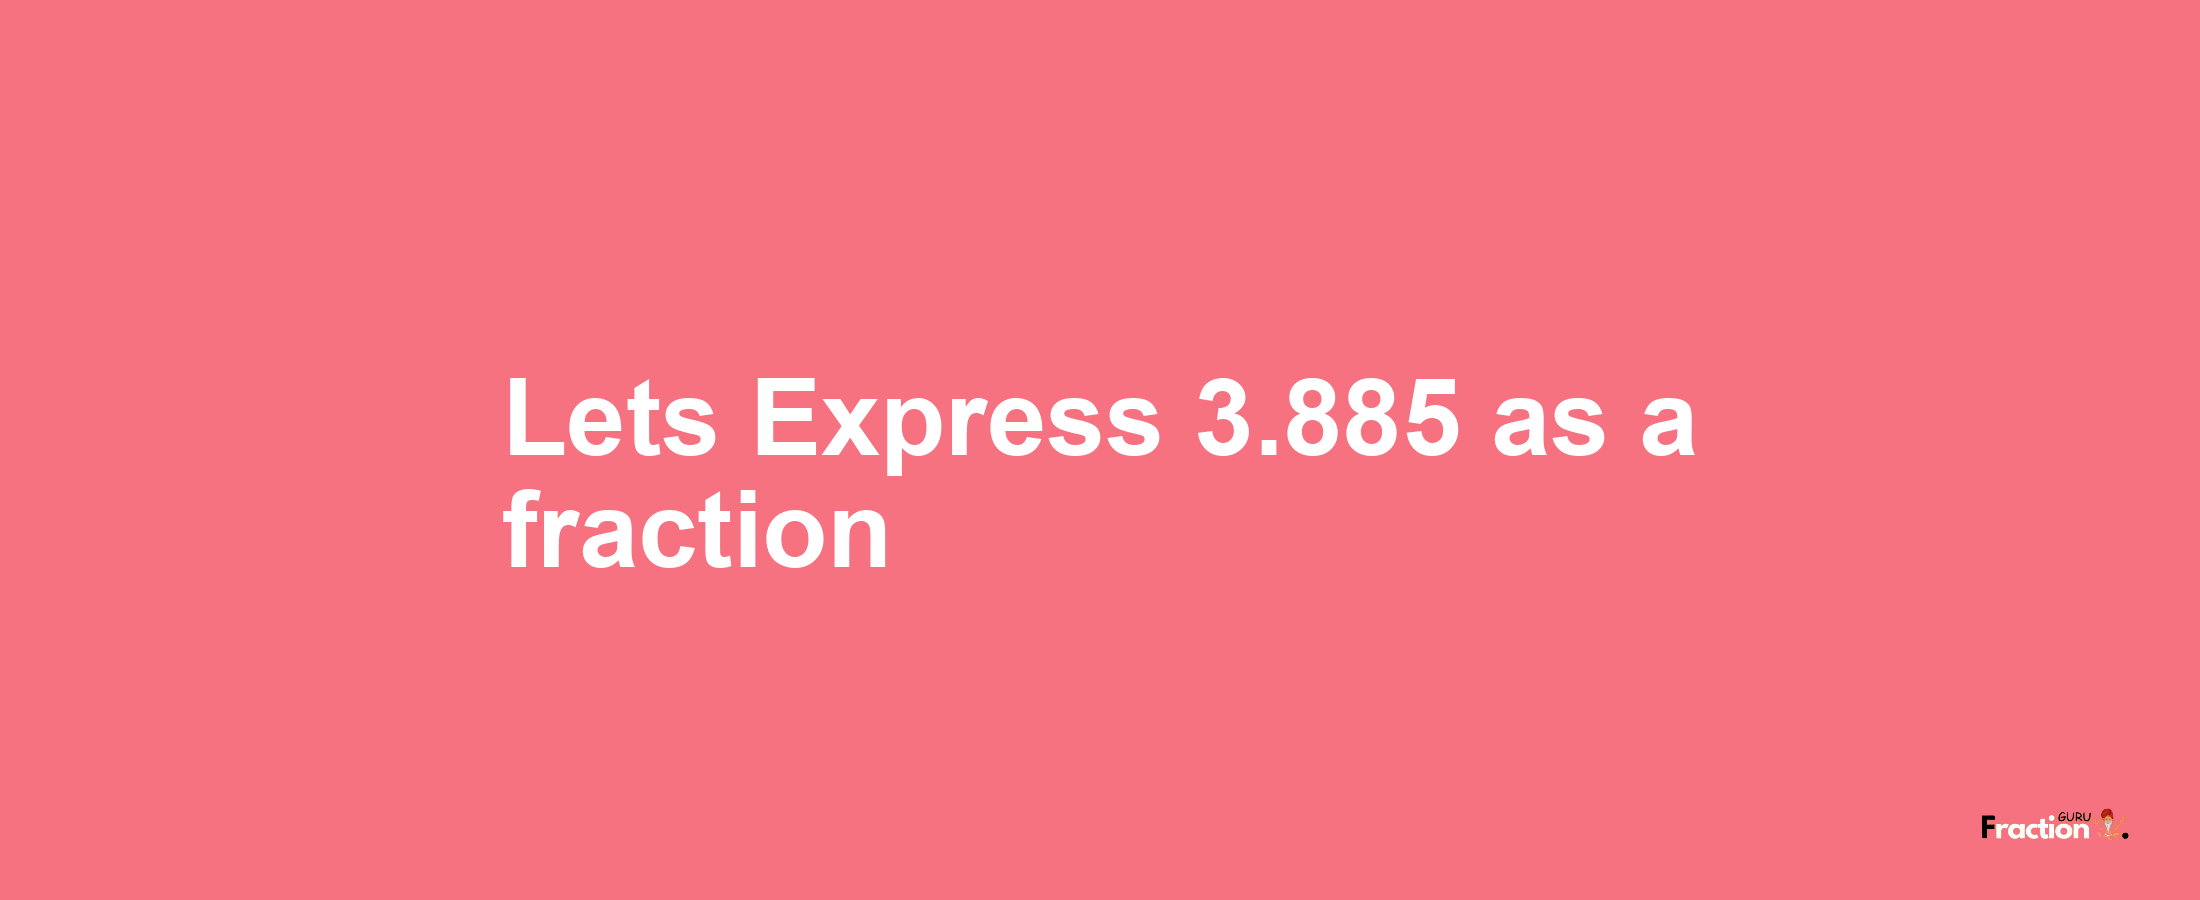 Lets Express 3.885 as afraction